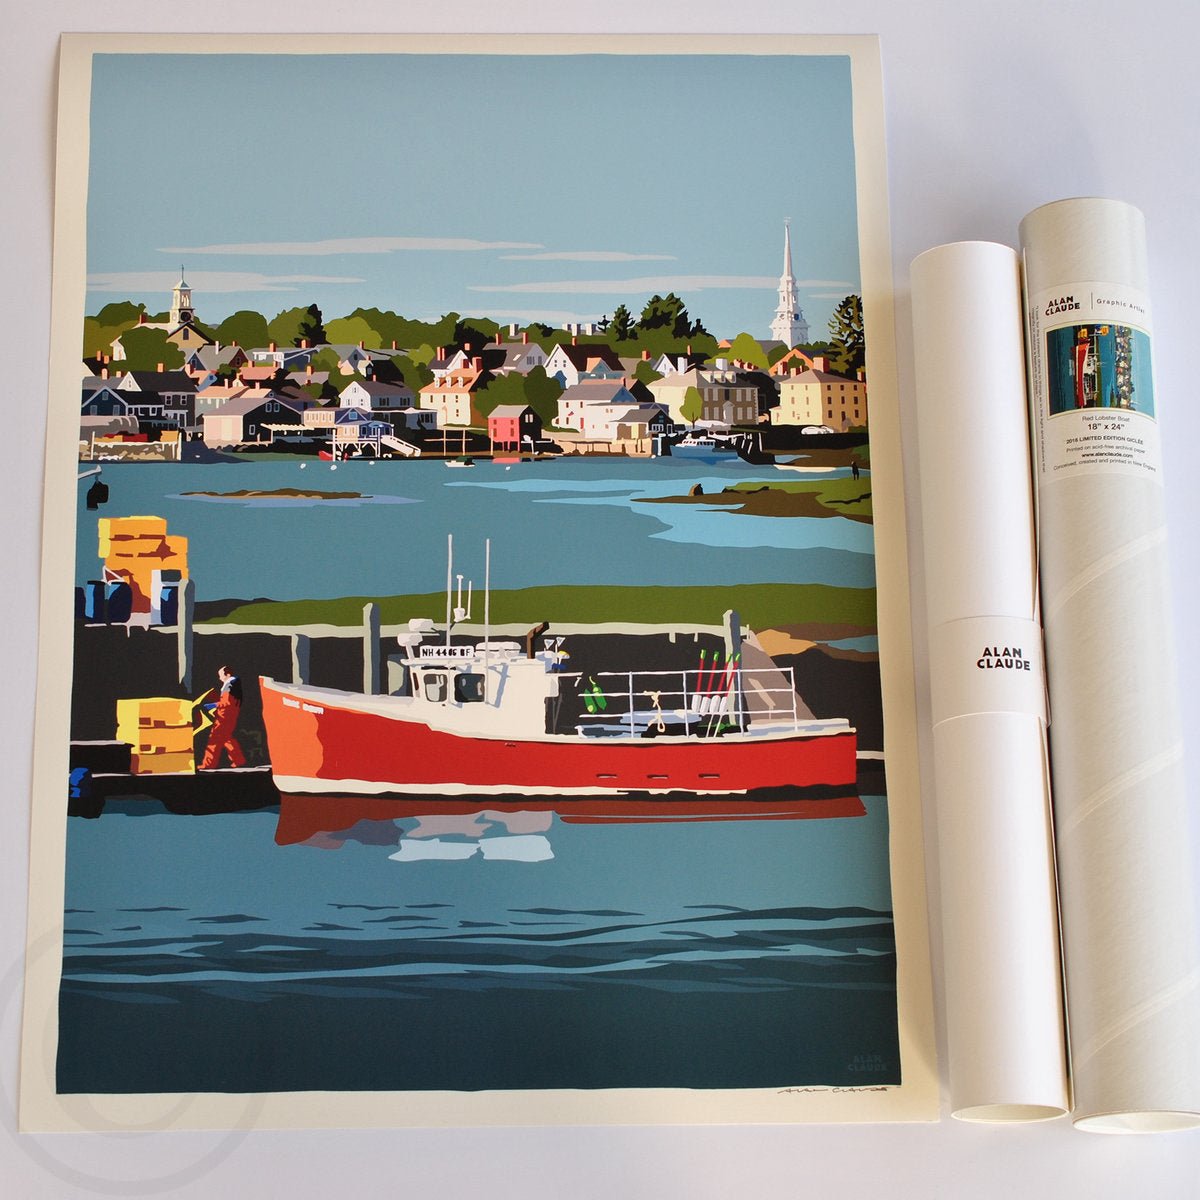 Red Lobster Boat Art Print 18" x 24" Wall Poster By Alan Claude - New Hampshire